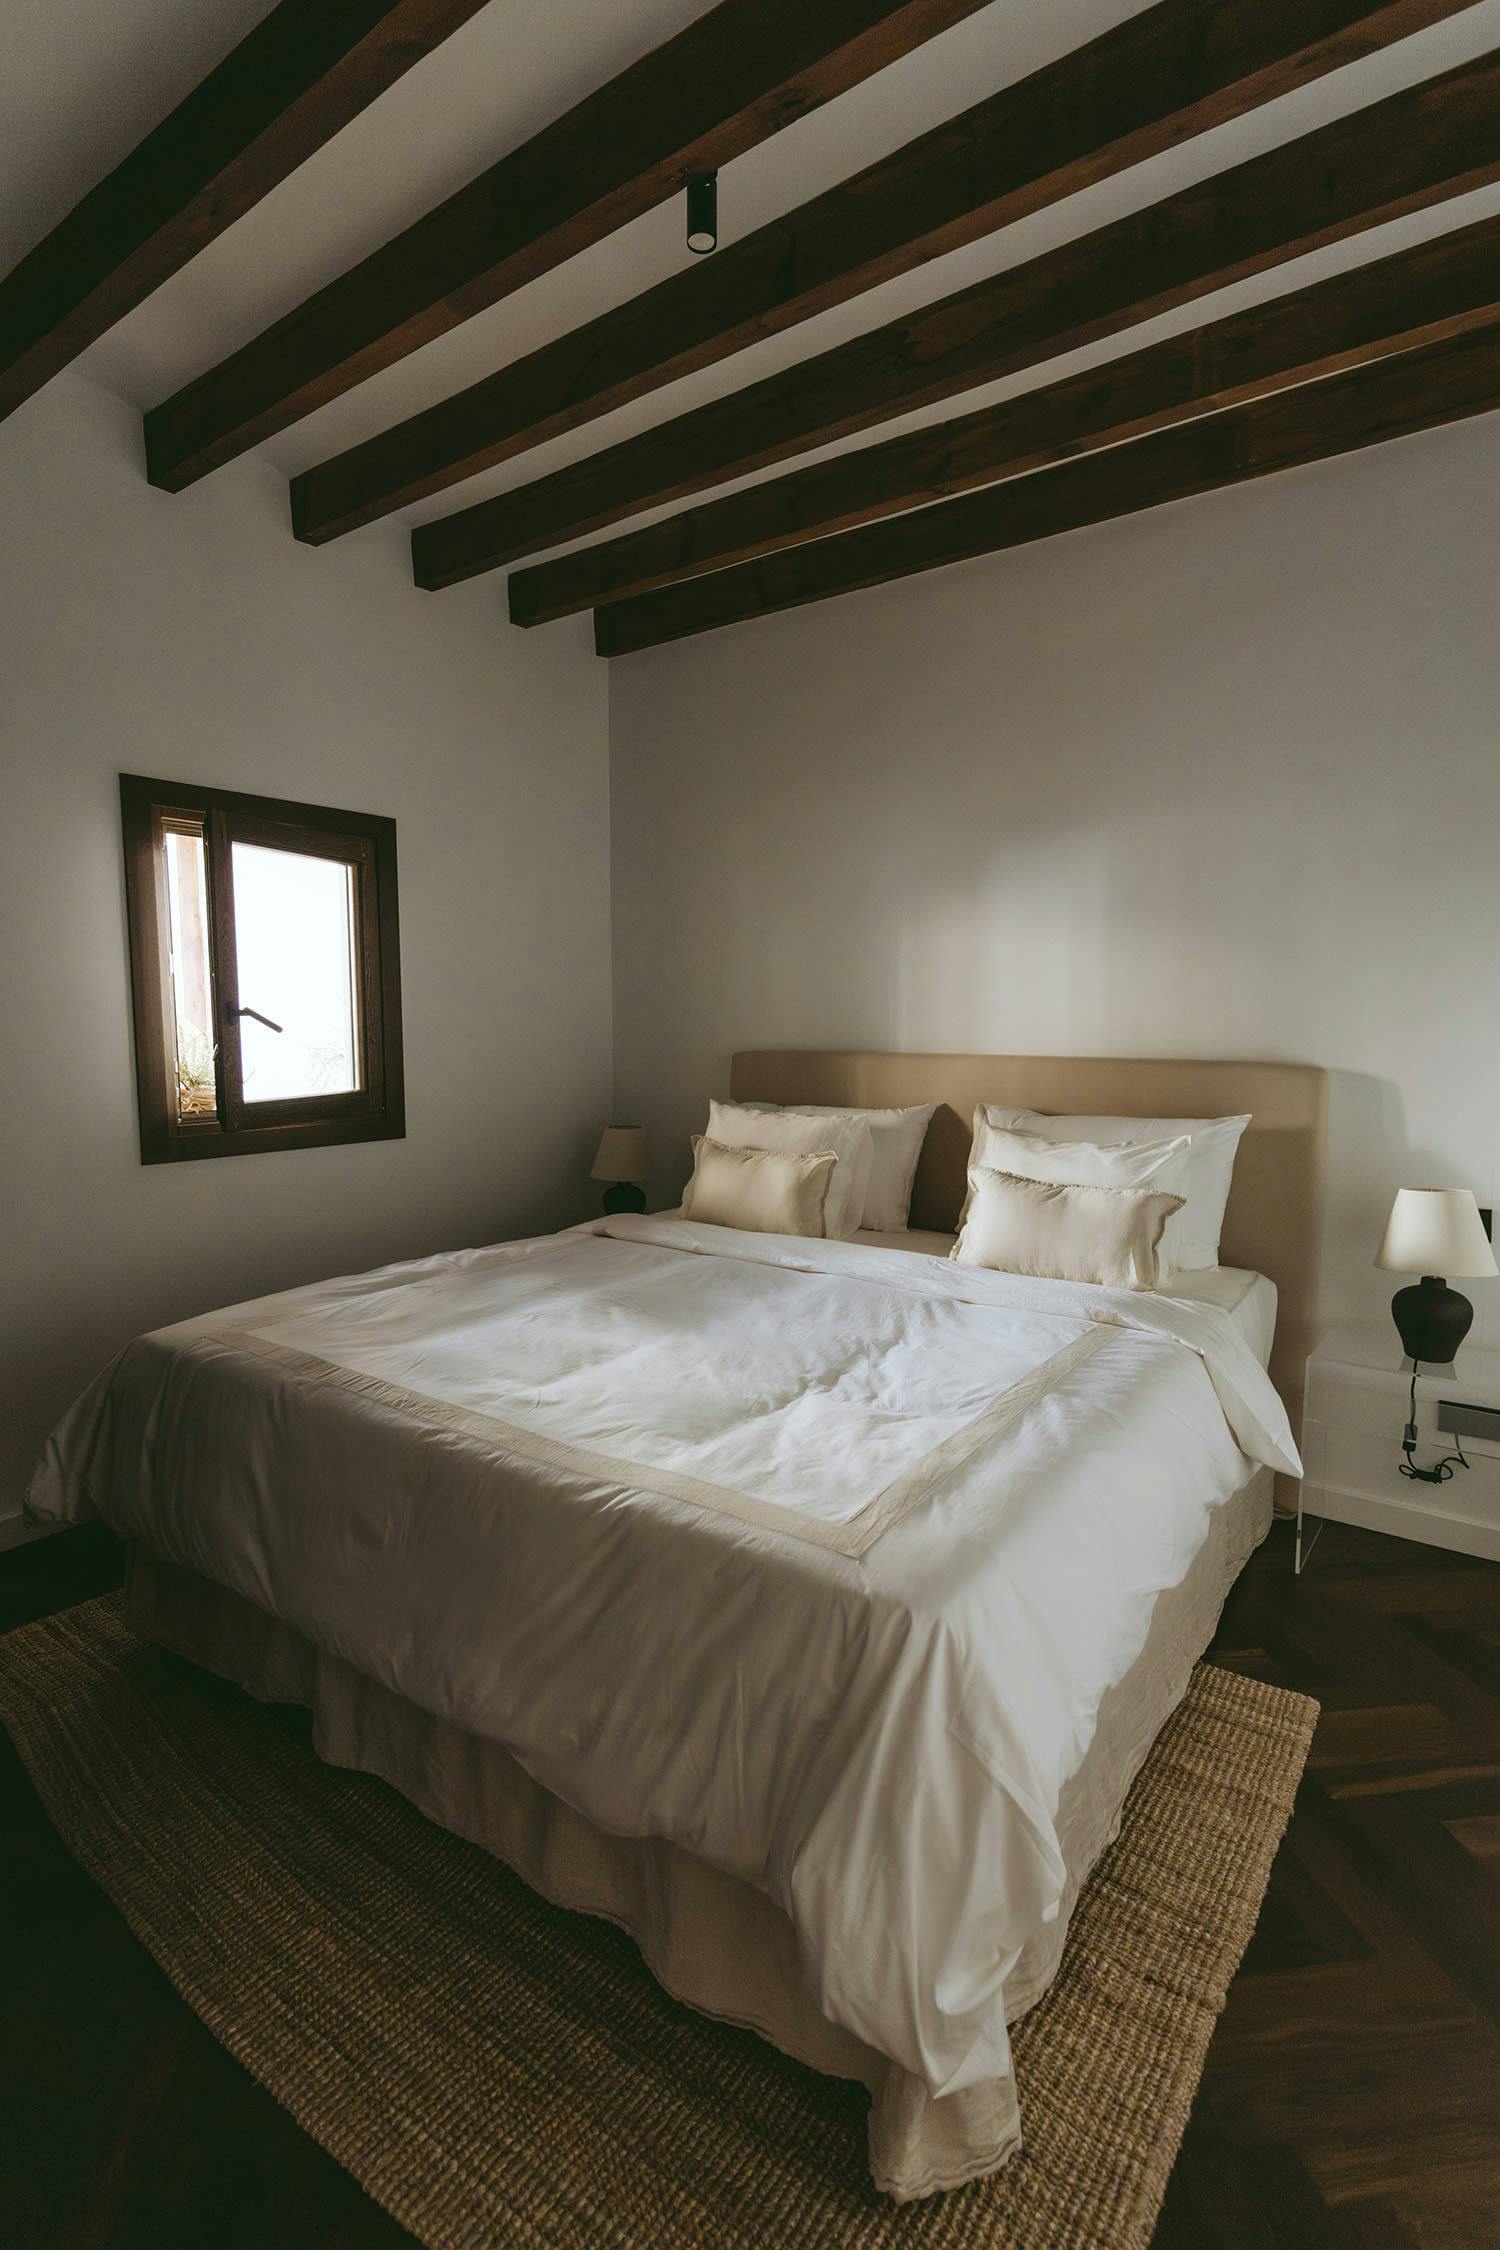 The image features a large bedroom with a neatly made bed, a wooden headboard, and a window.